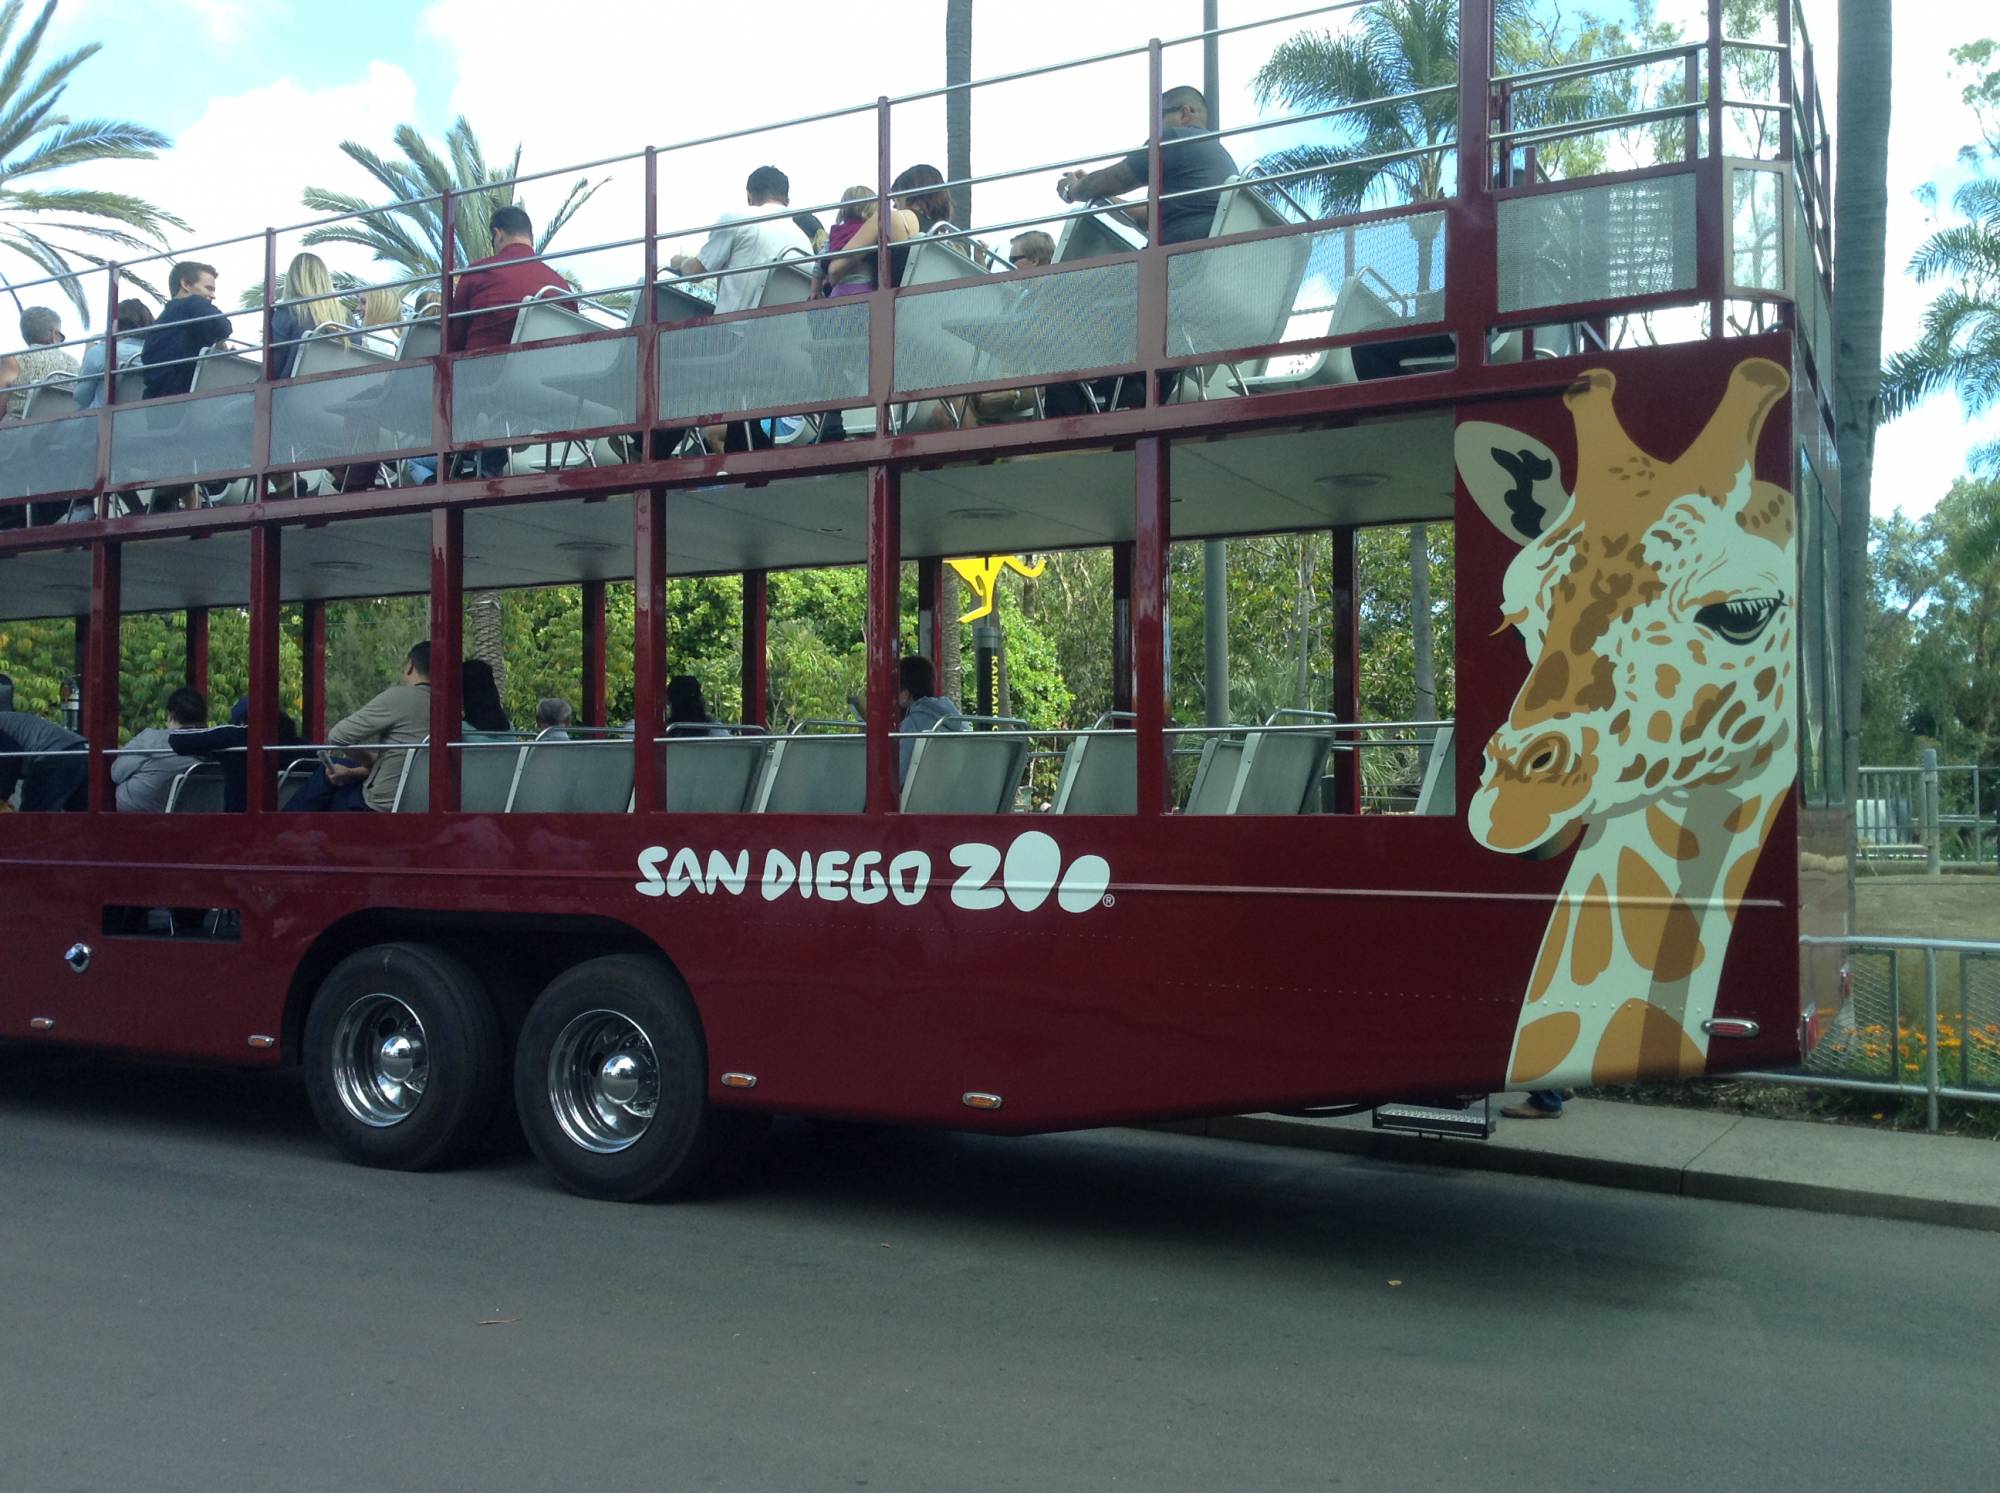 Explore the San Diego Zoo while in Southern California |PassPorter.com